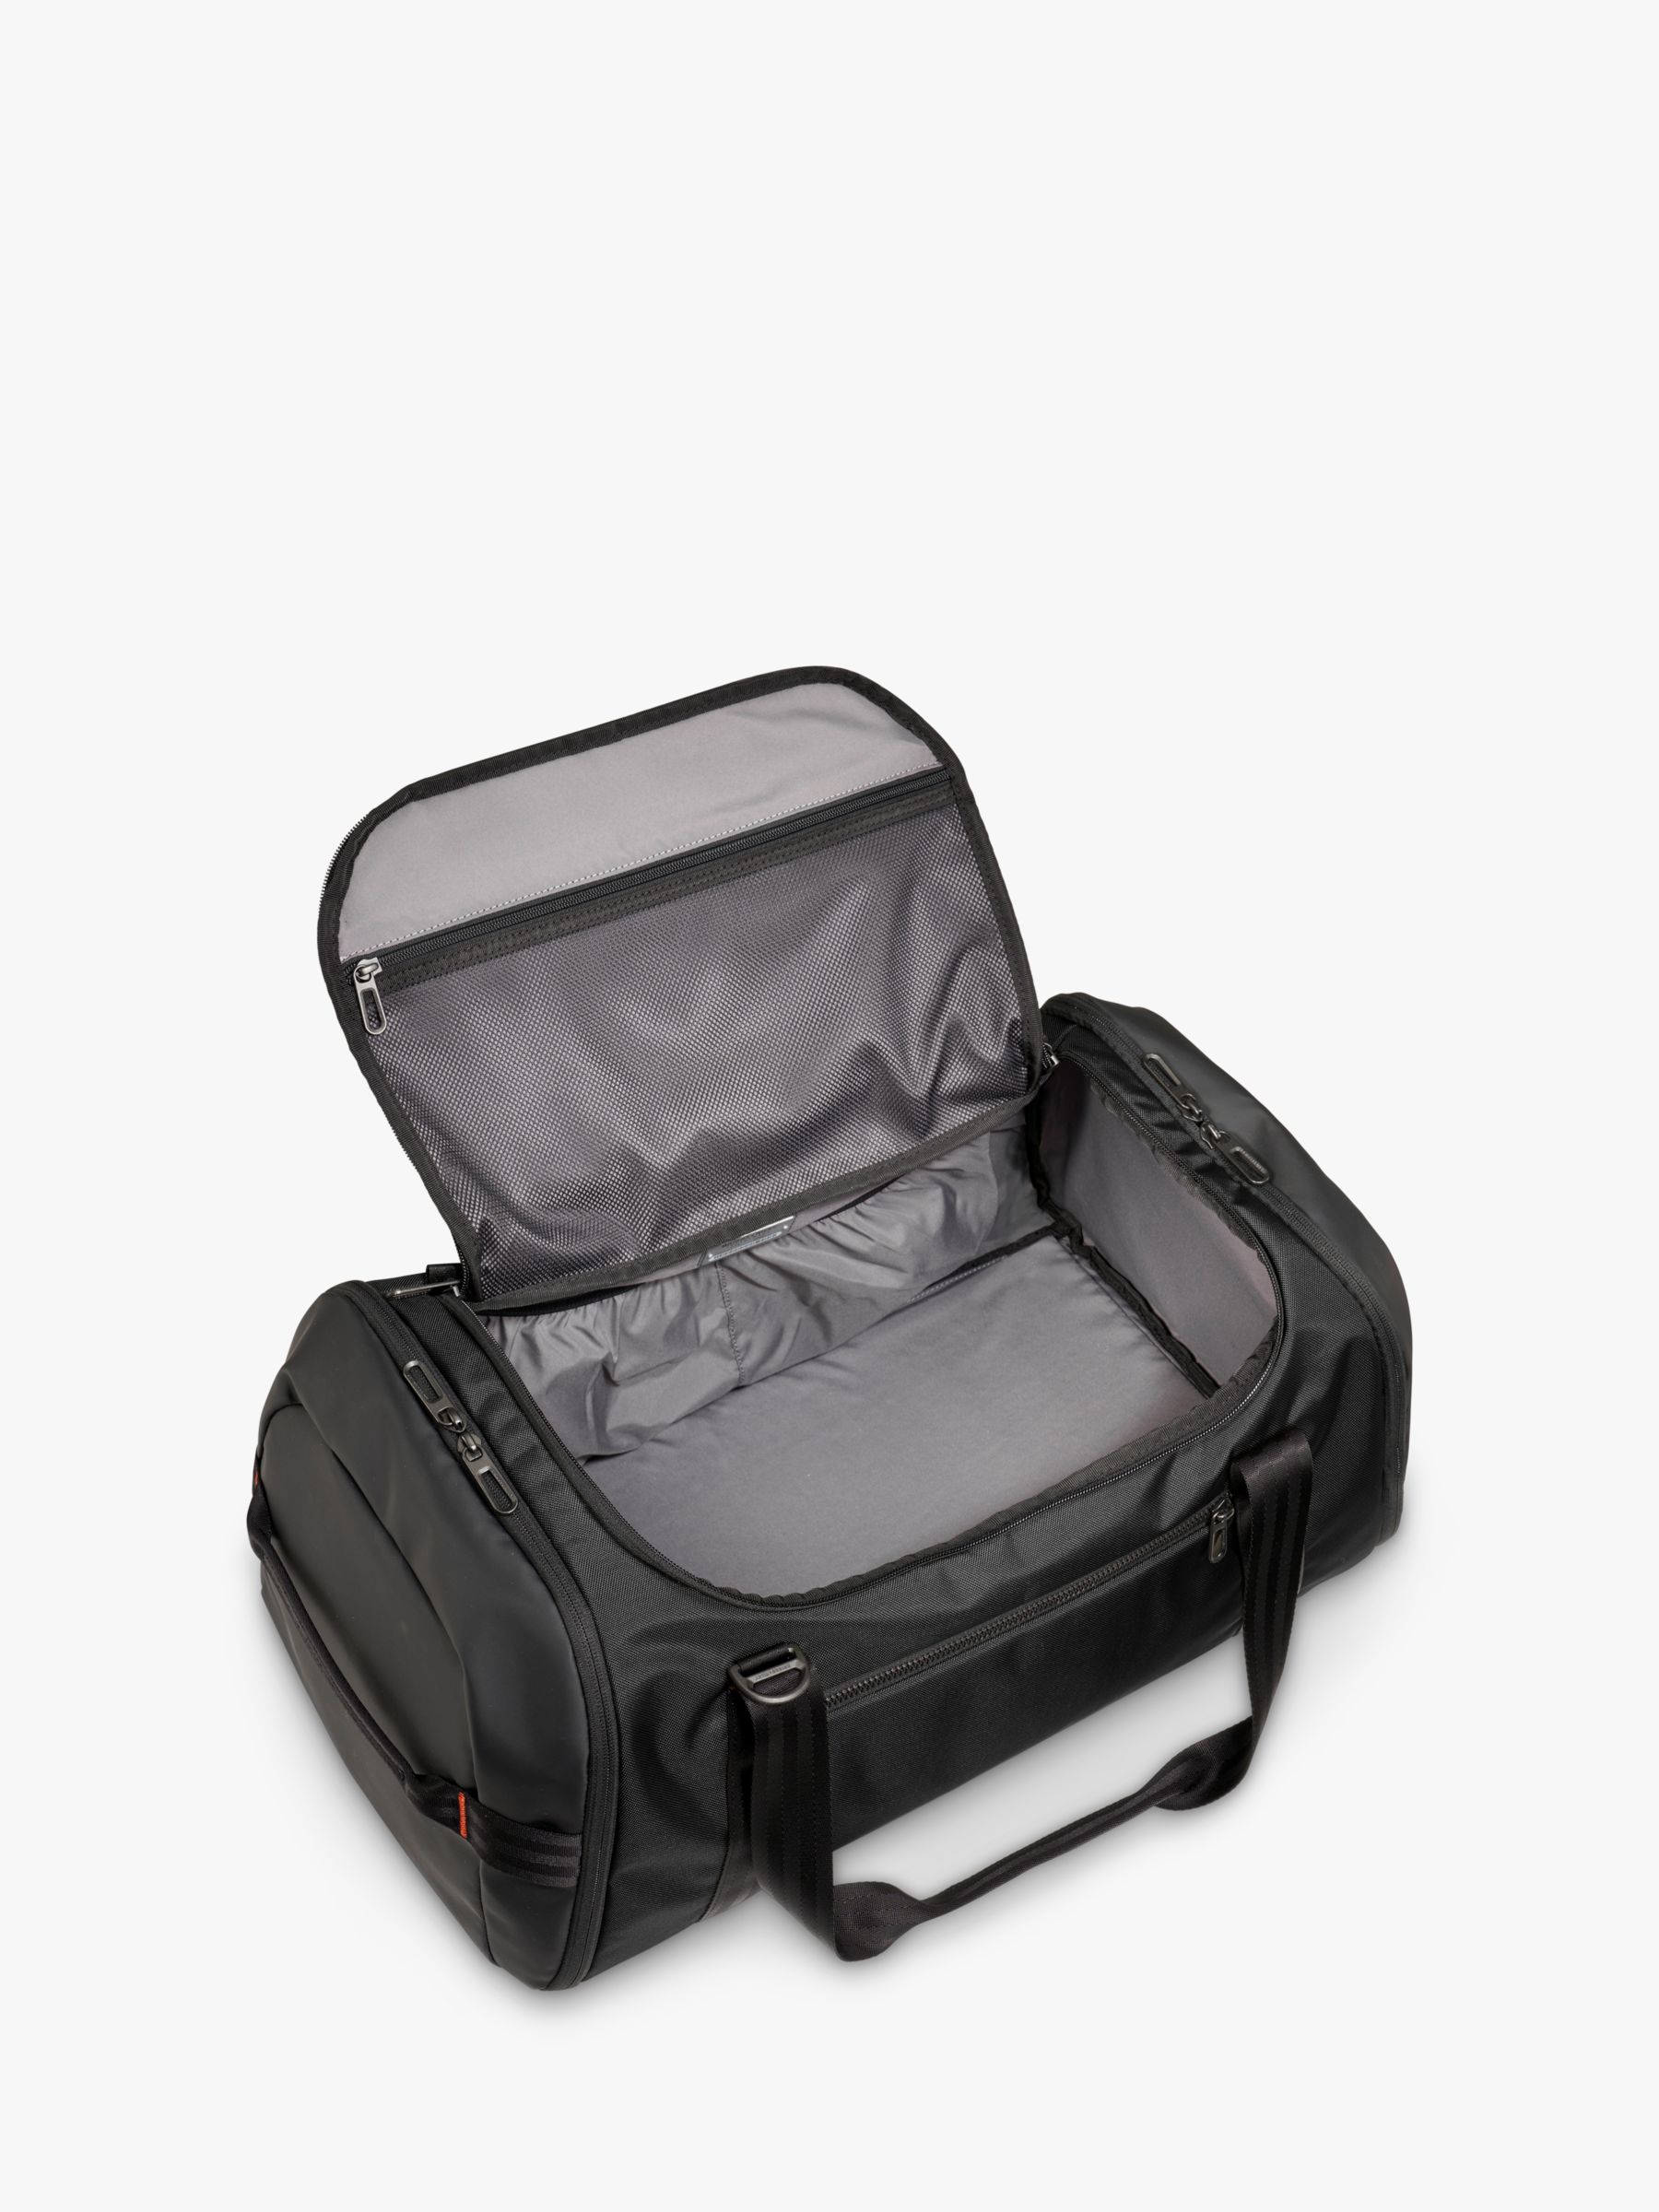 Buy Briggs & Riley ZDX Large Travel Duffle Holdall Online at johnlewis.com